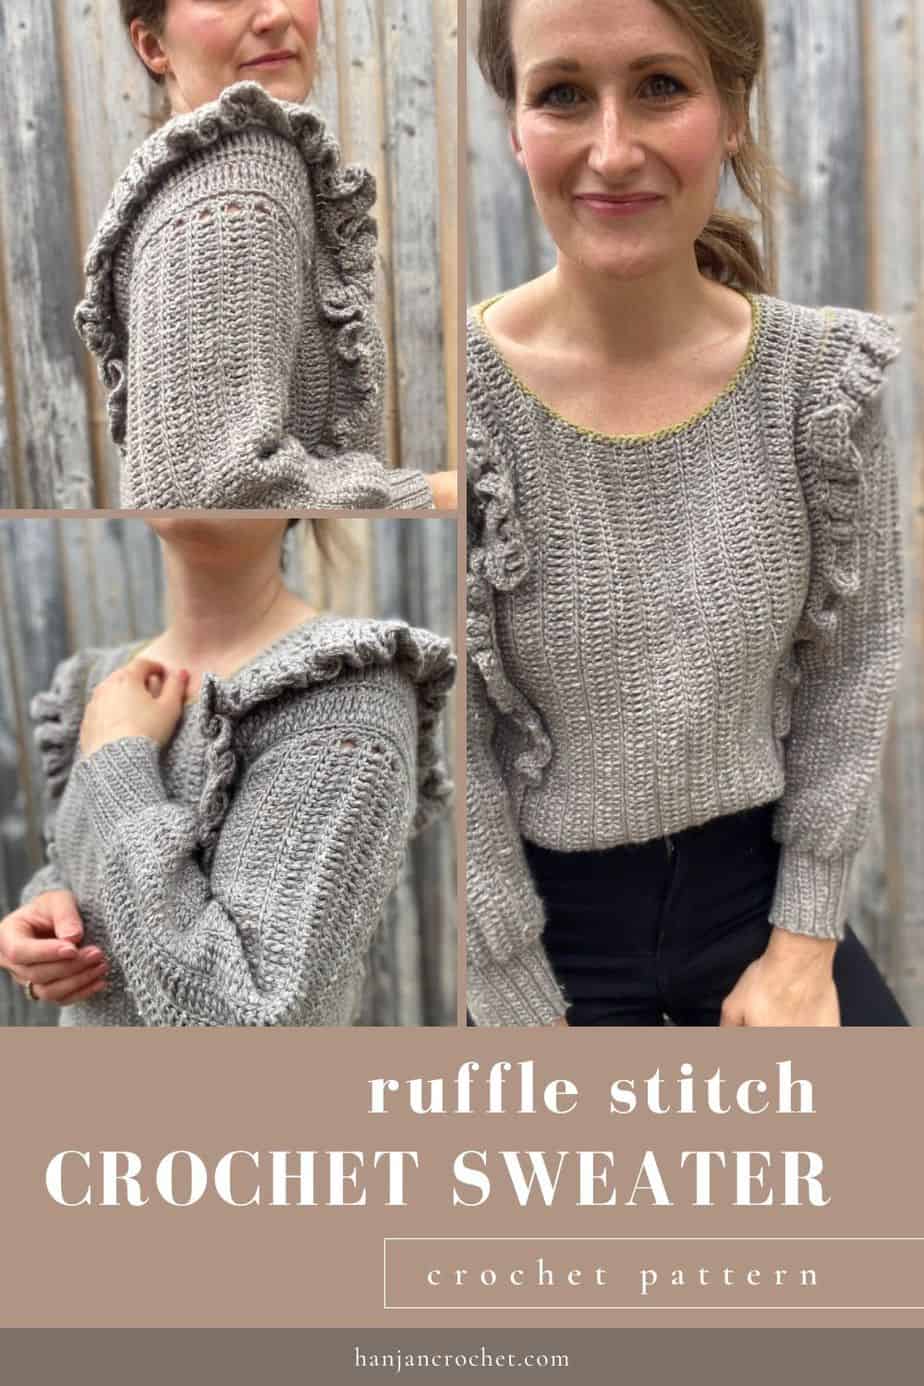 3 images of woman wearing grey crochet sweater with ruffle detail to front and back